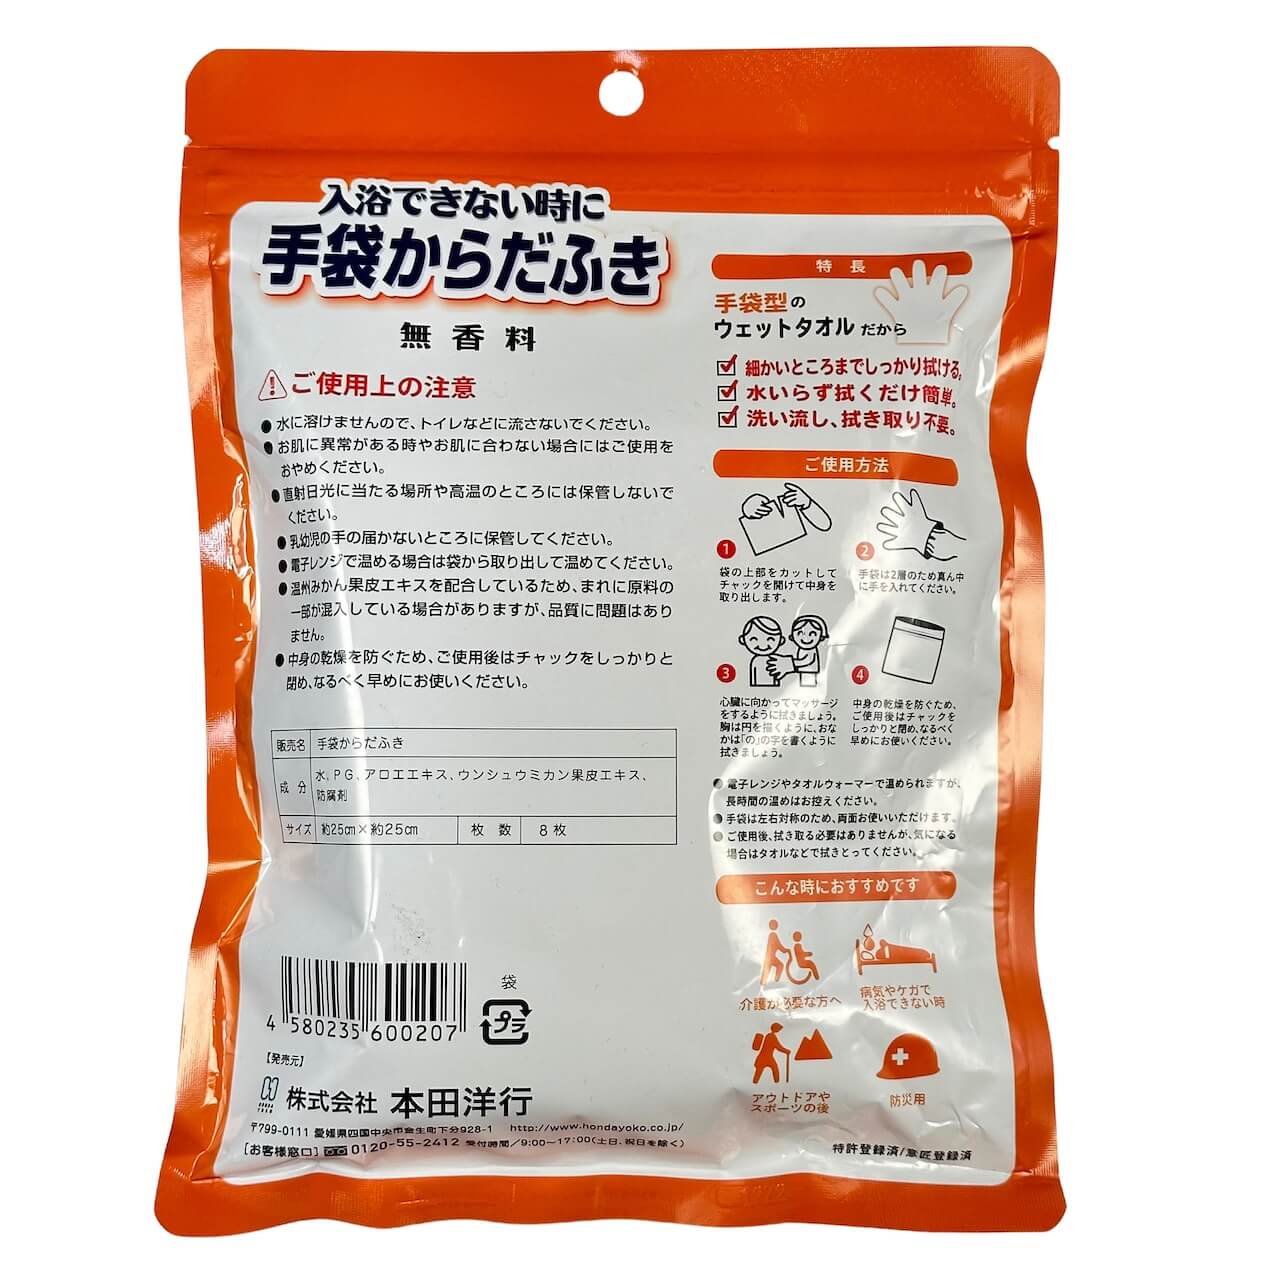 Glove body wipes (unscented, glove-shaped cleaning sheets, 8 sheets, made in Japan) 